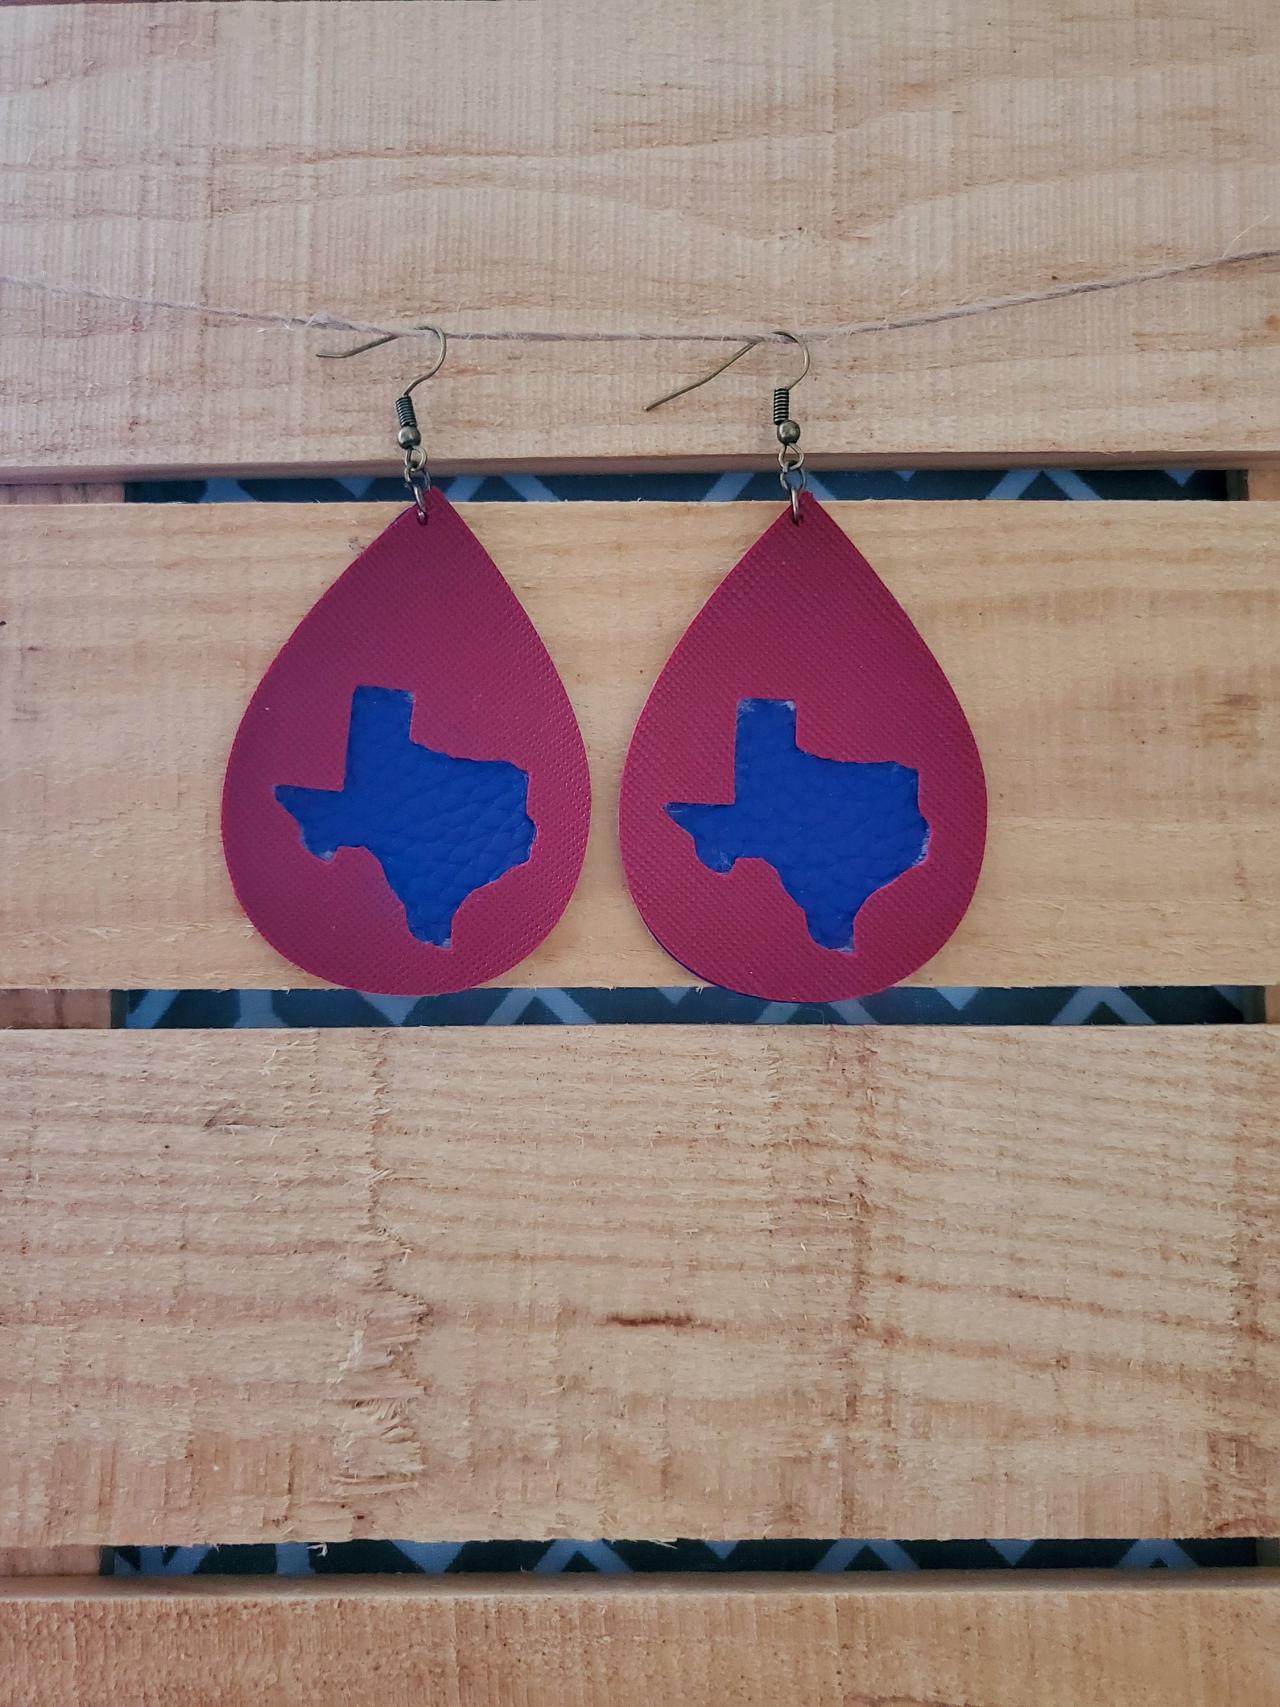 Texas Leather Earrings, State Jewelry, Going Away Present, Tx Earrings, Texas Roots, Texas Jewelry, State Earrings, Leather Dangles, Cutout